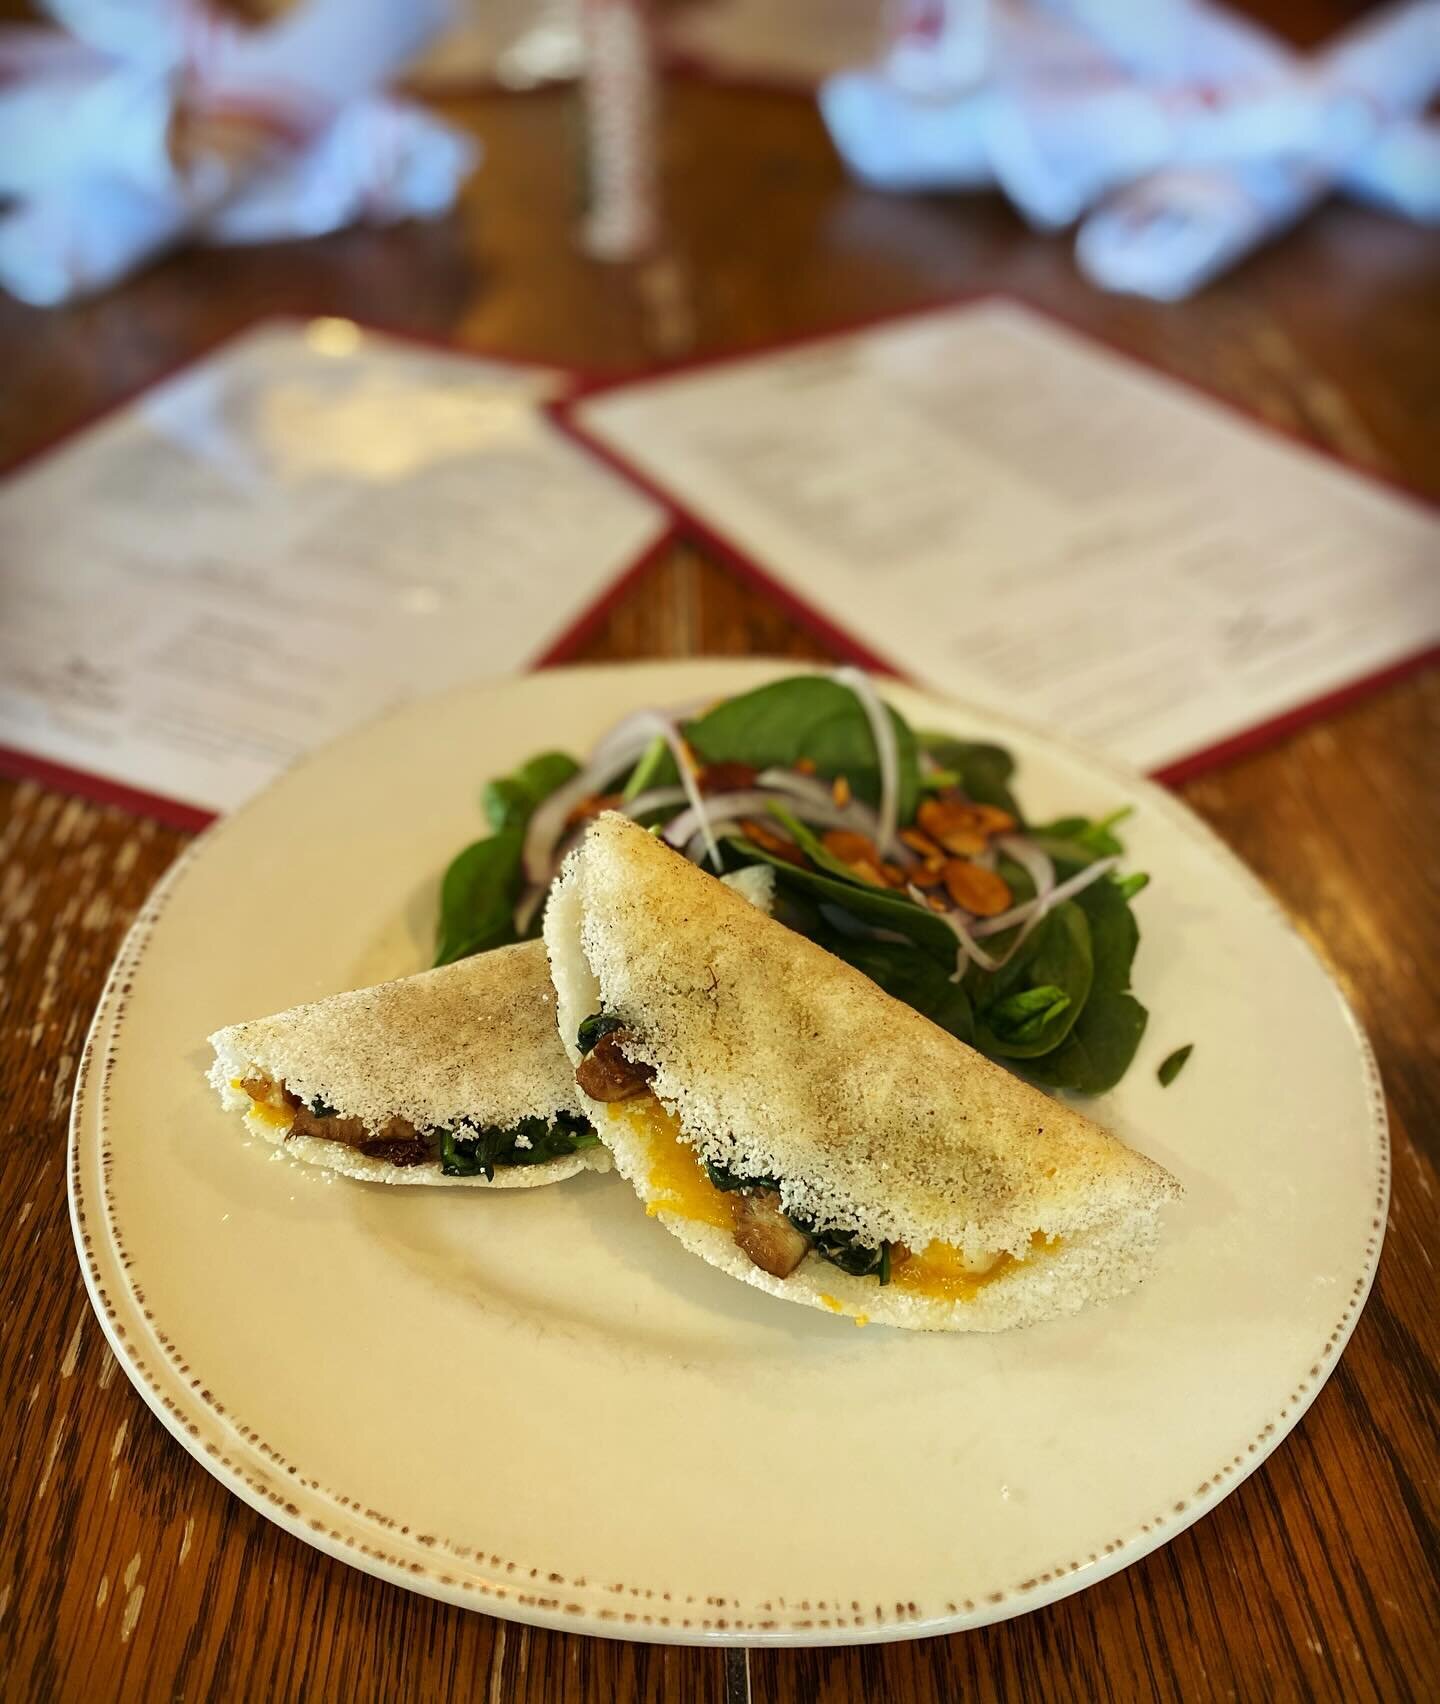 New veggie offering on the lunch features! Two tapioca flour quesadillas with spinach, @highcountryfungi mushrooms, and cheddar cheese! Gluten free and comes with your choice of side.